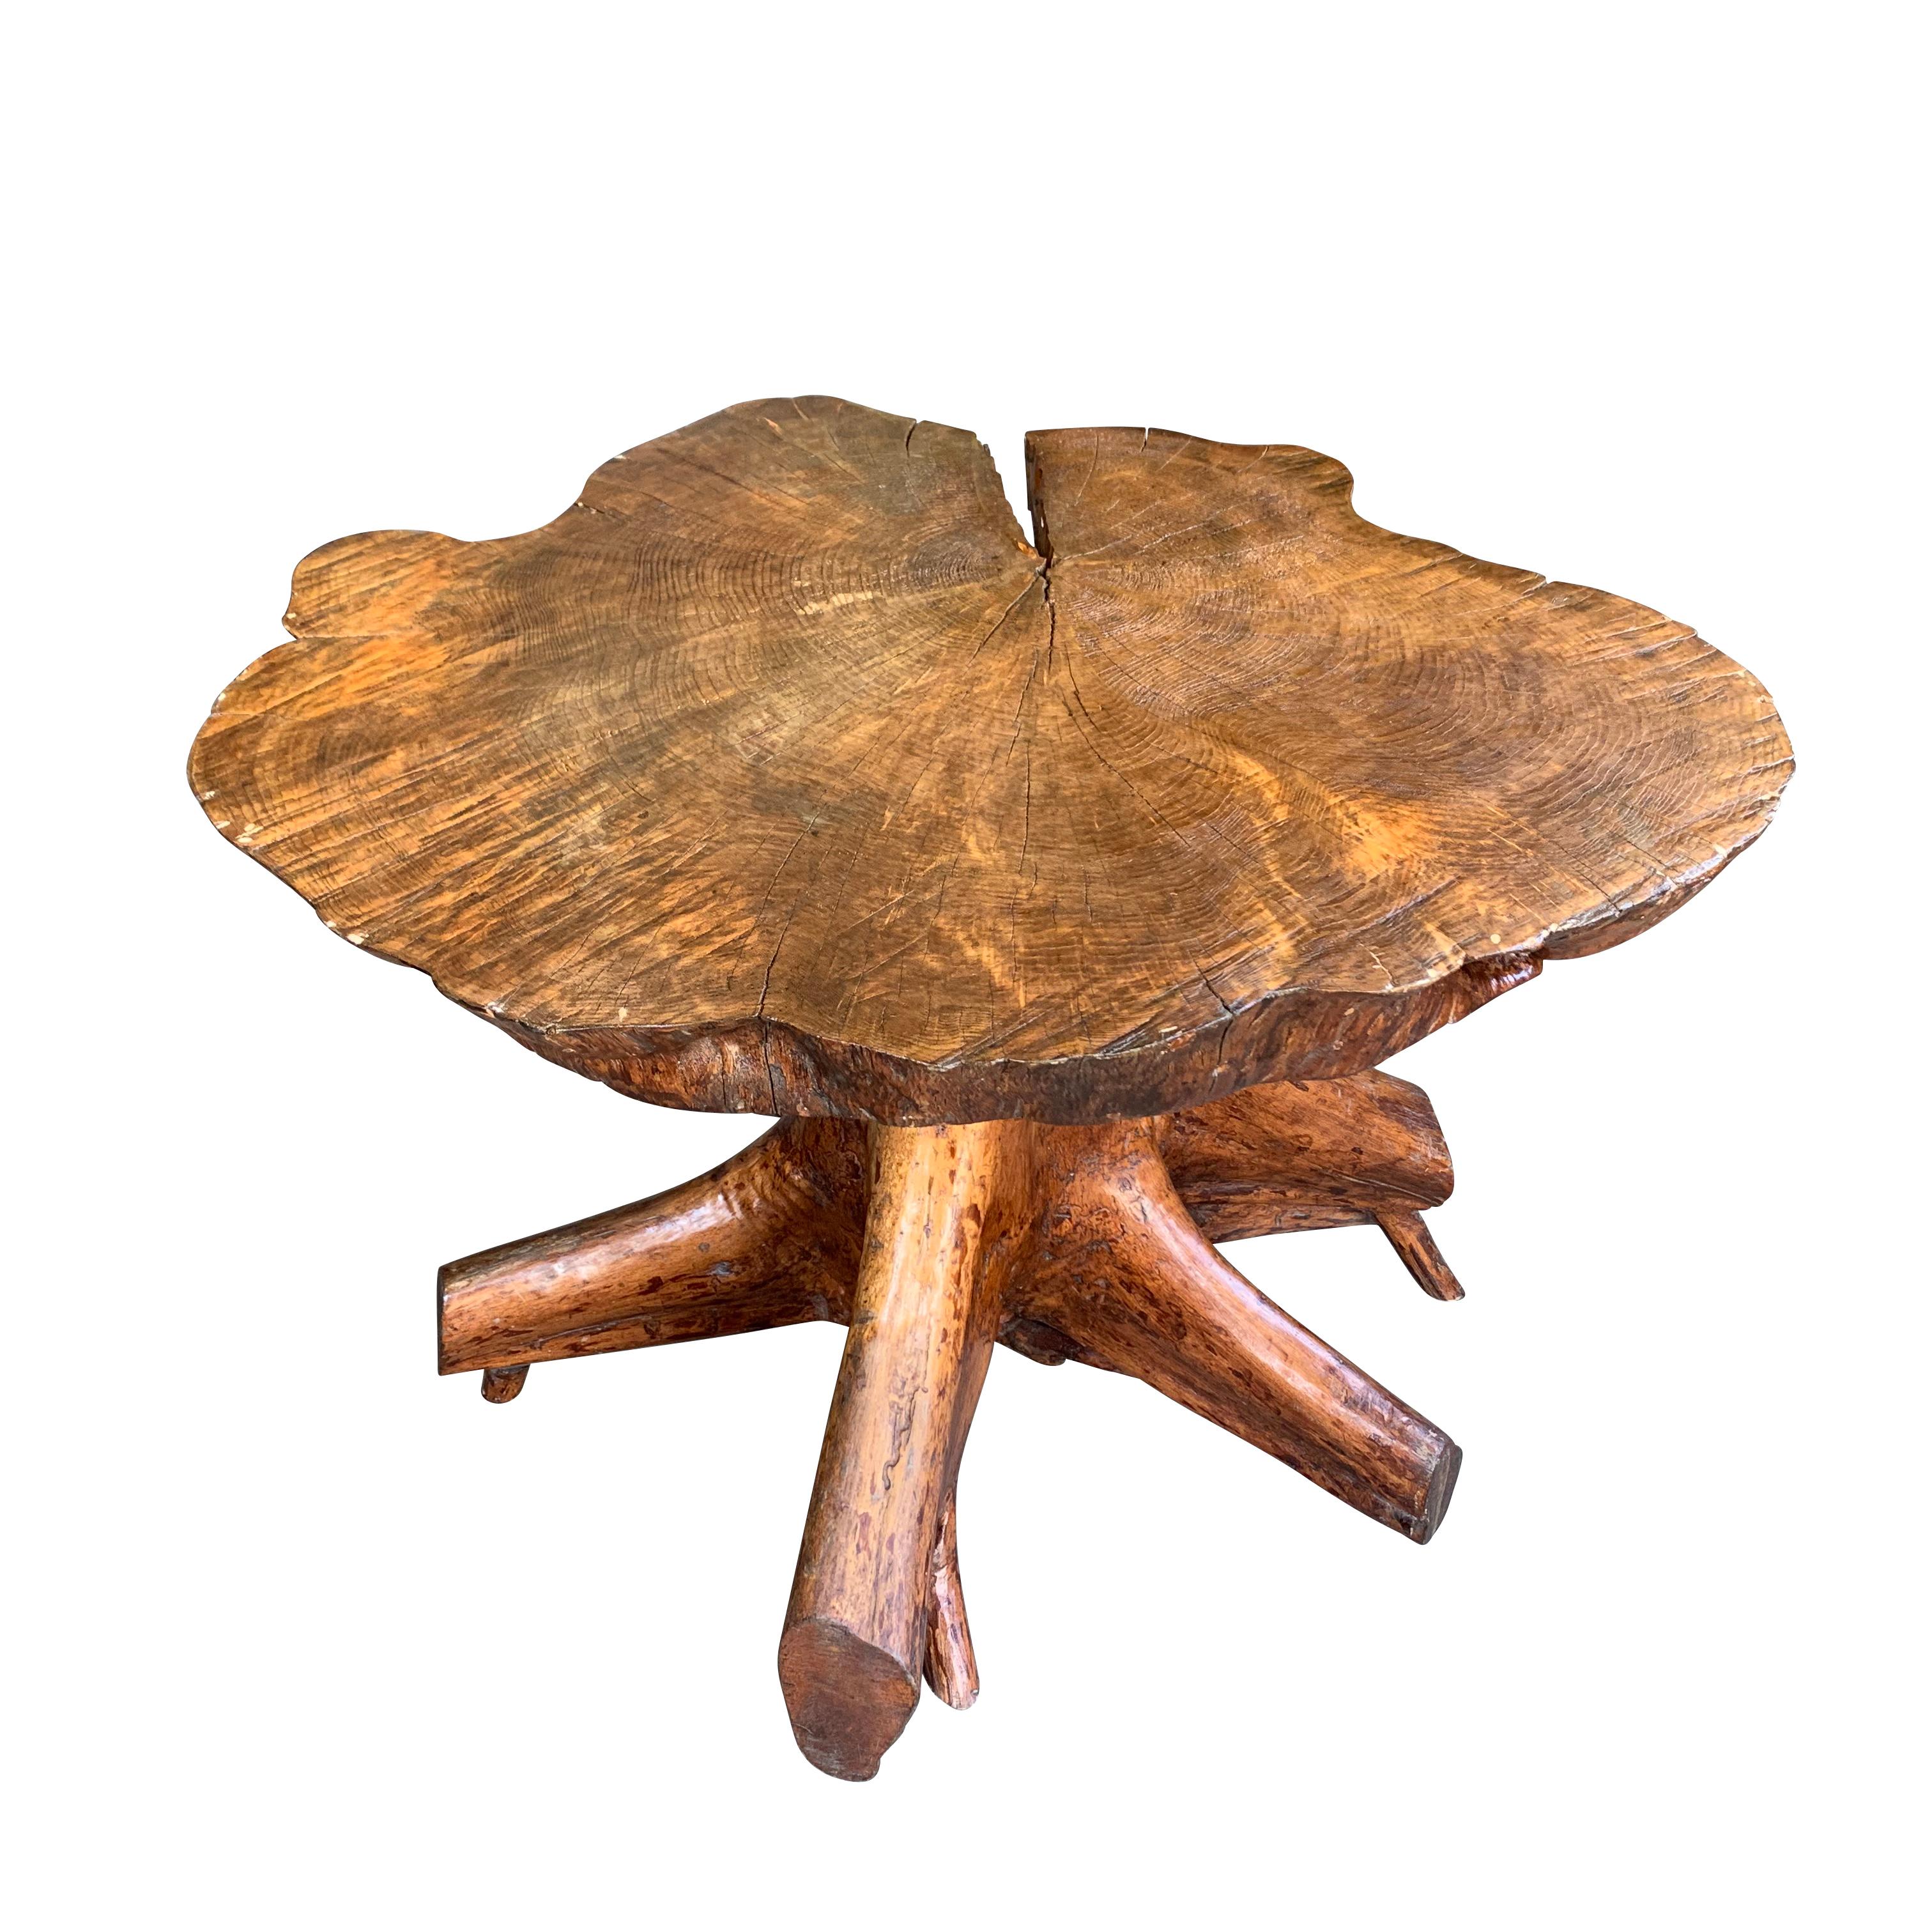 20th century French unusual and unique side table made from a large French tree root
Beautiful natural patina.